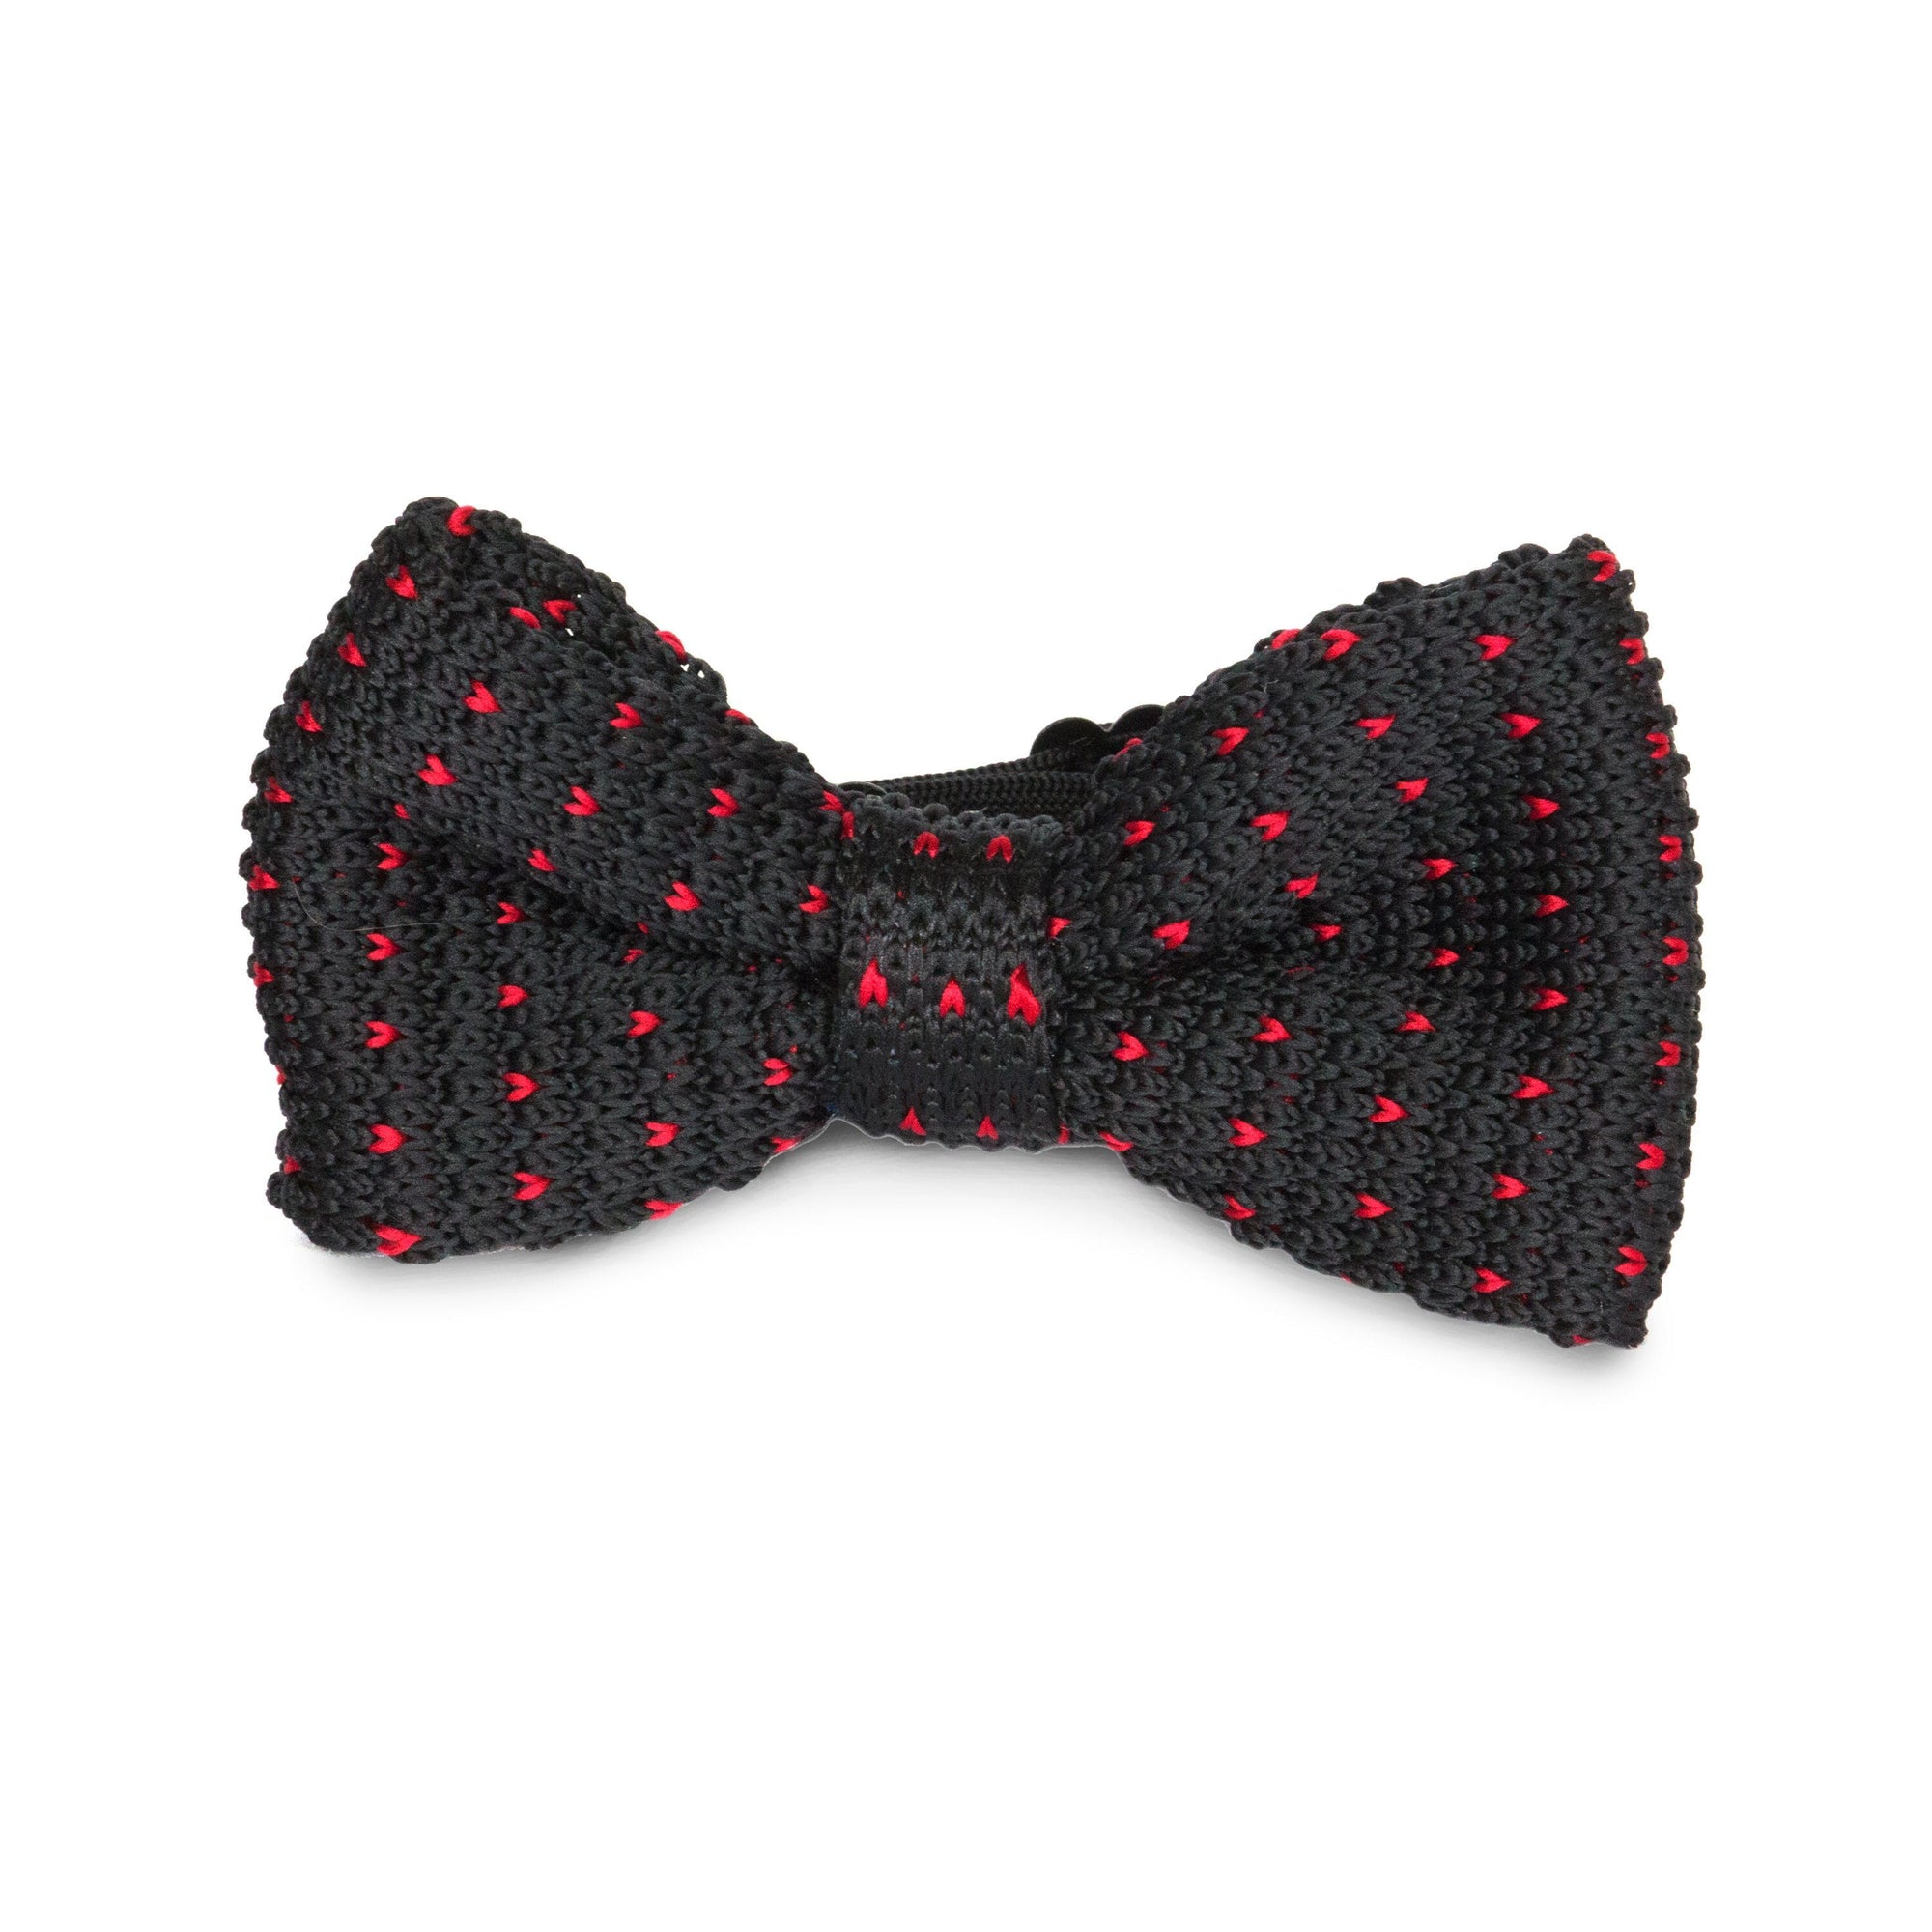 Black/Red Dot Adult Knit Bowtie Bow Ties Clinks Australia Black/Red Dot Adult Knit Bowtie 